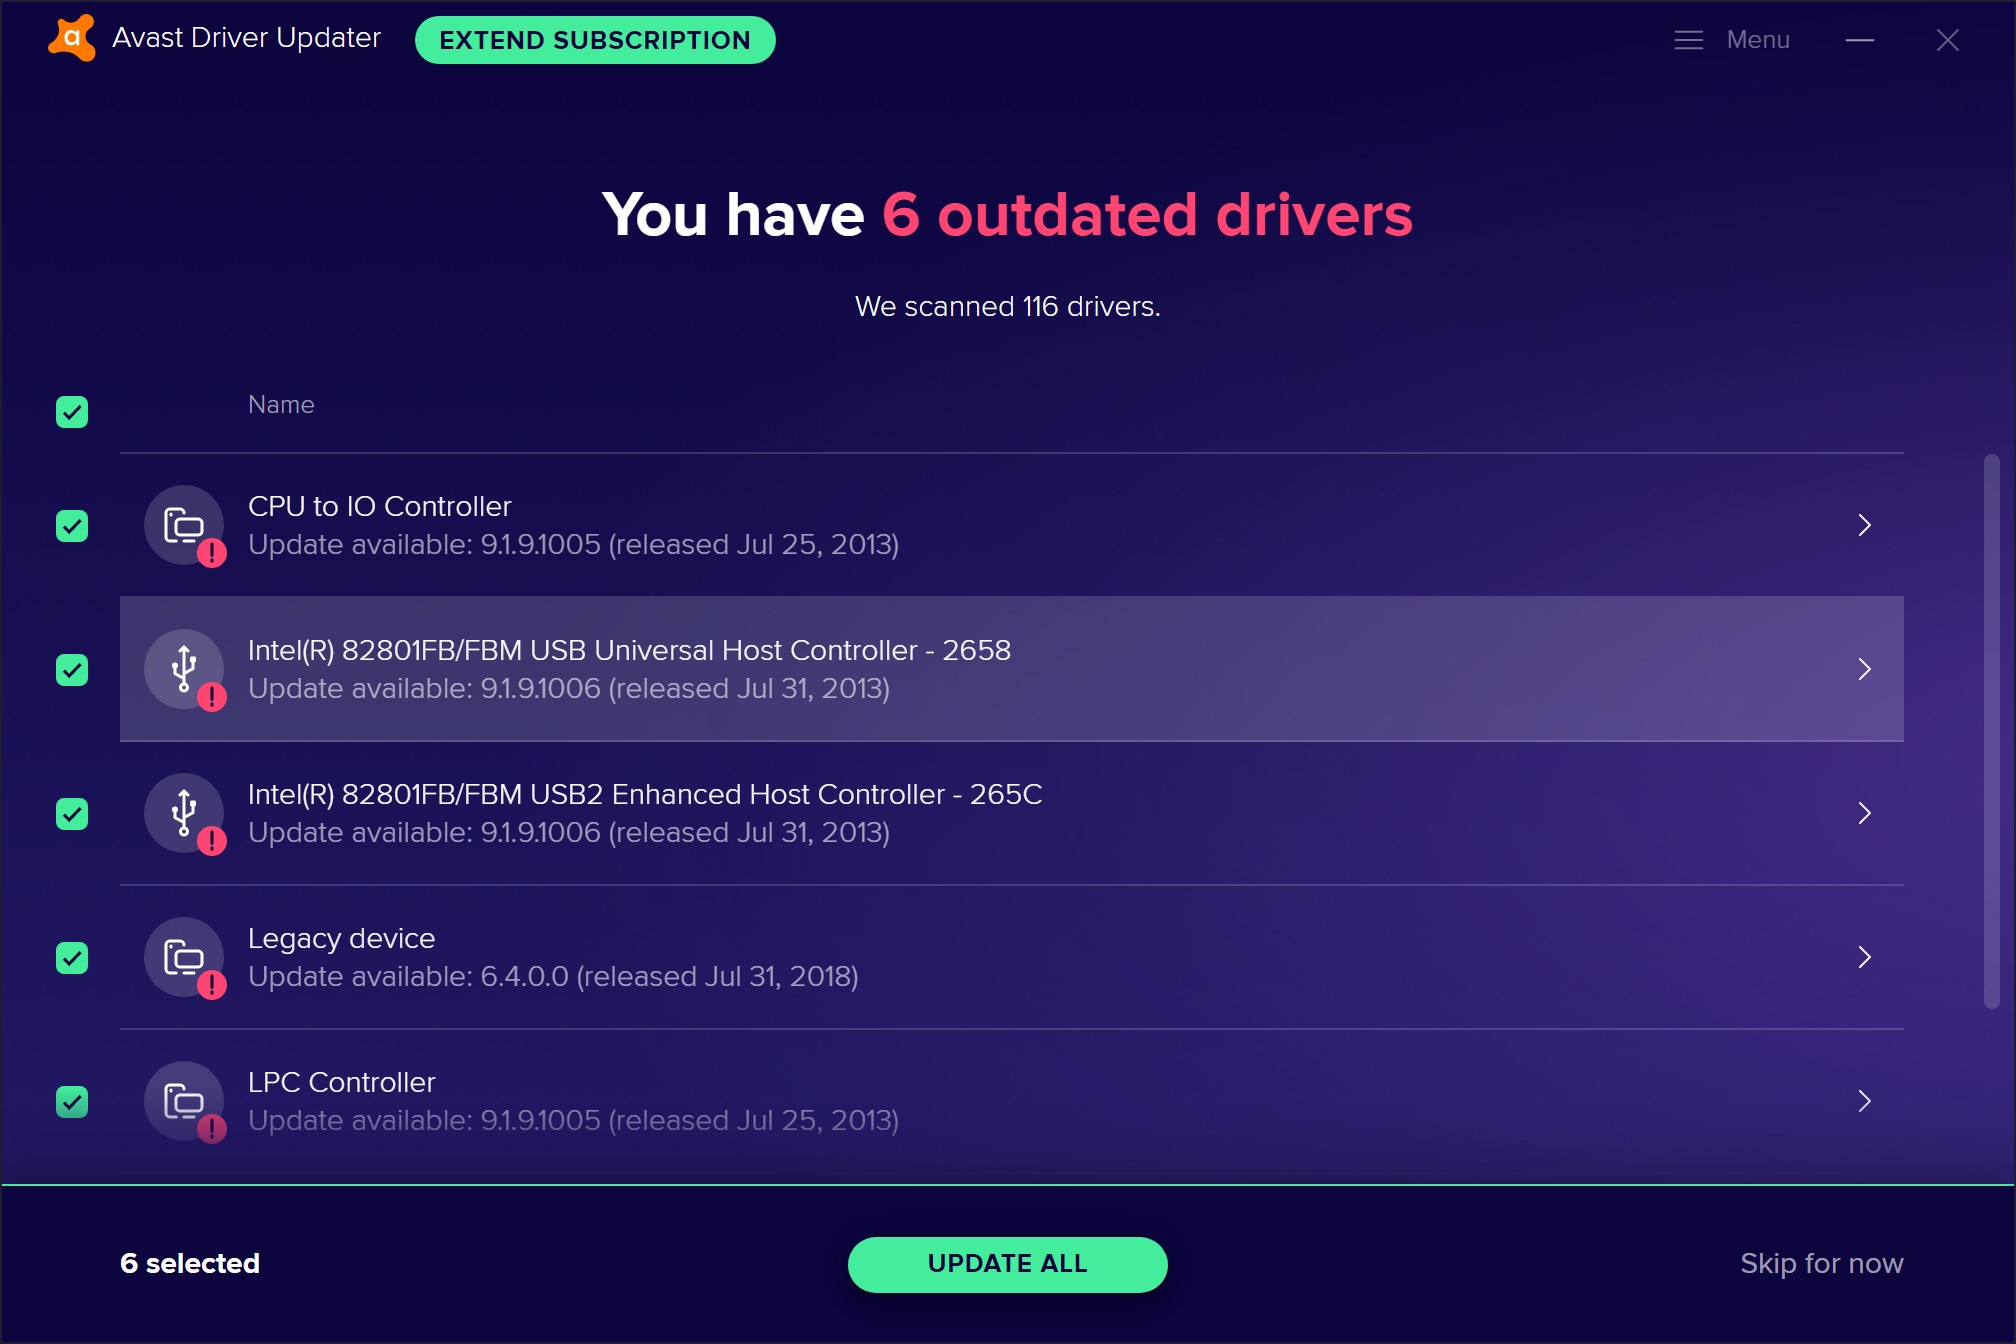 does avast driver updater cost extra